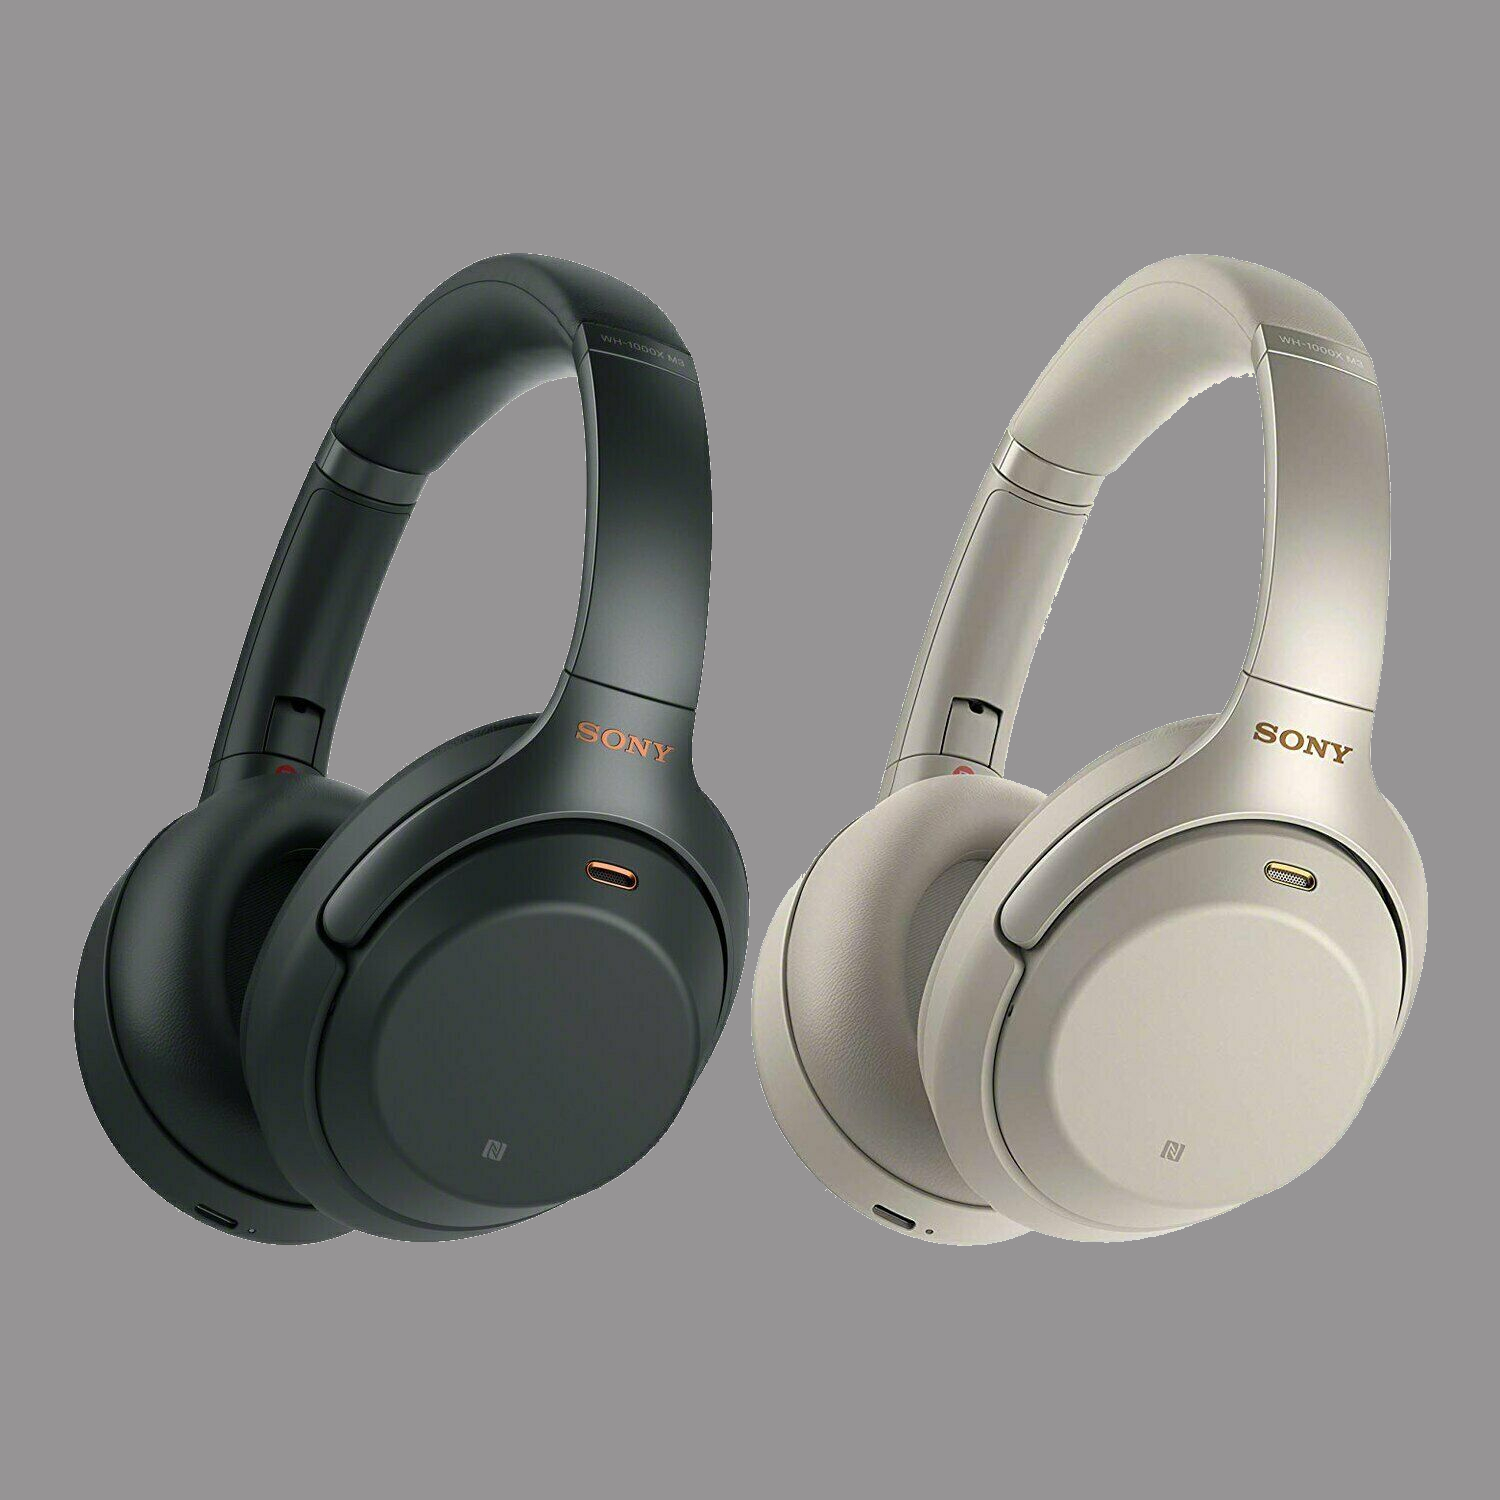 Sony WH-1000XM4 Vs. WH-1000XM3: Which one should you buy?